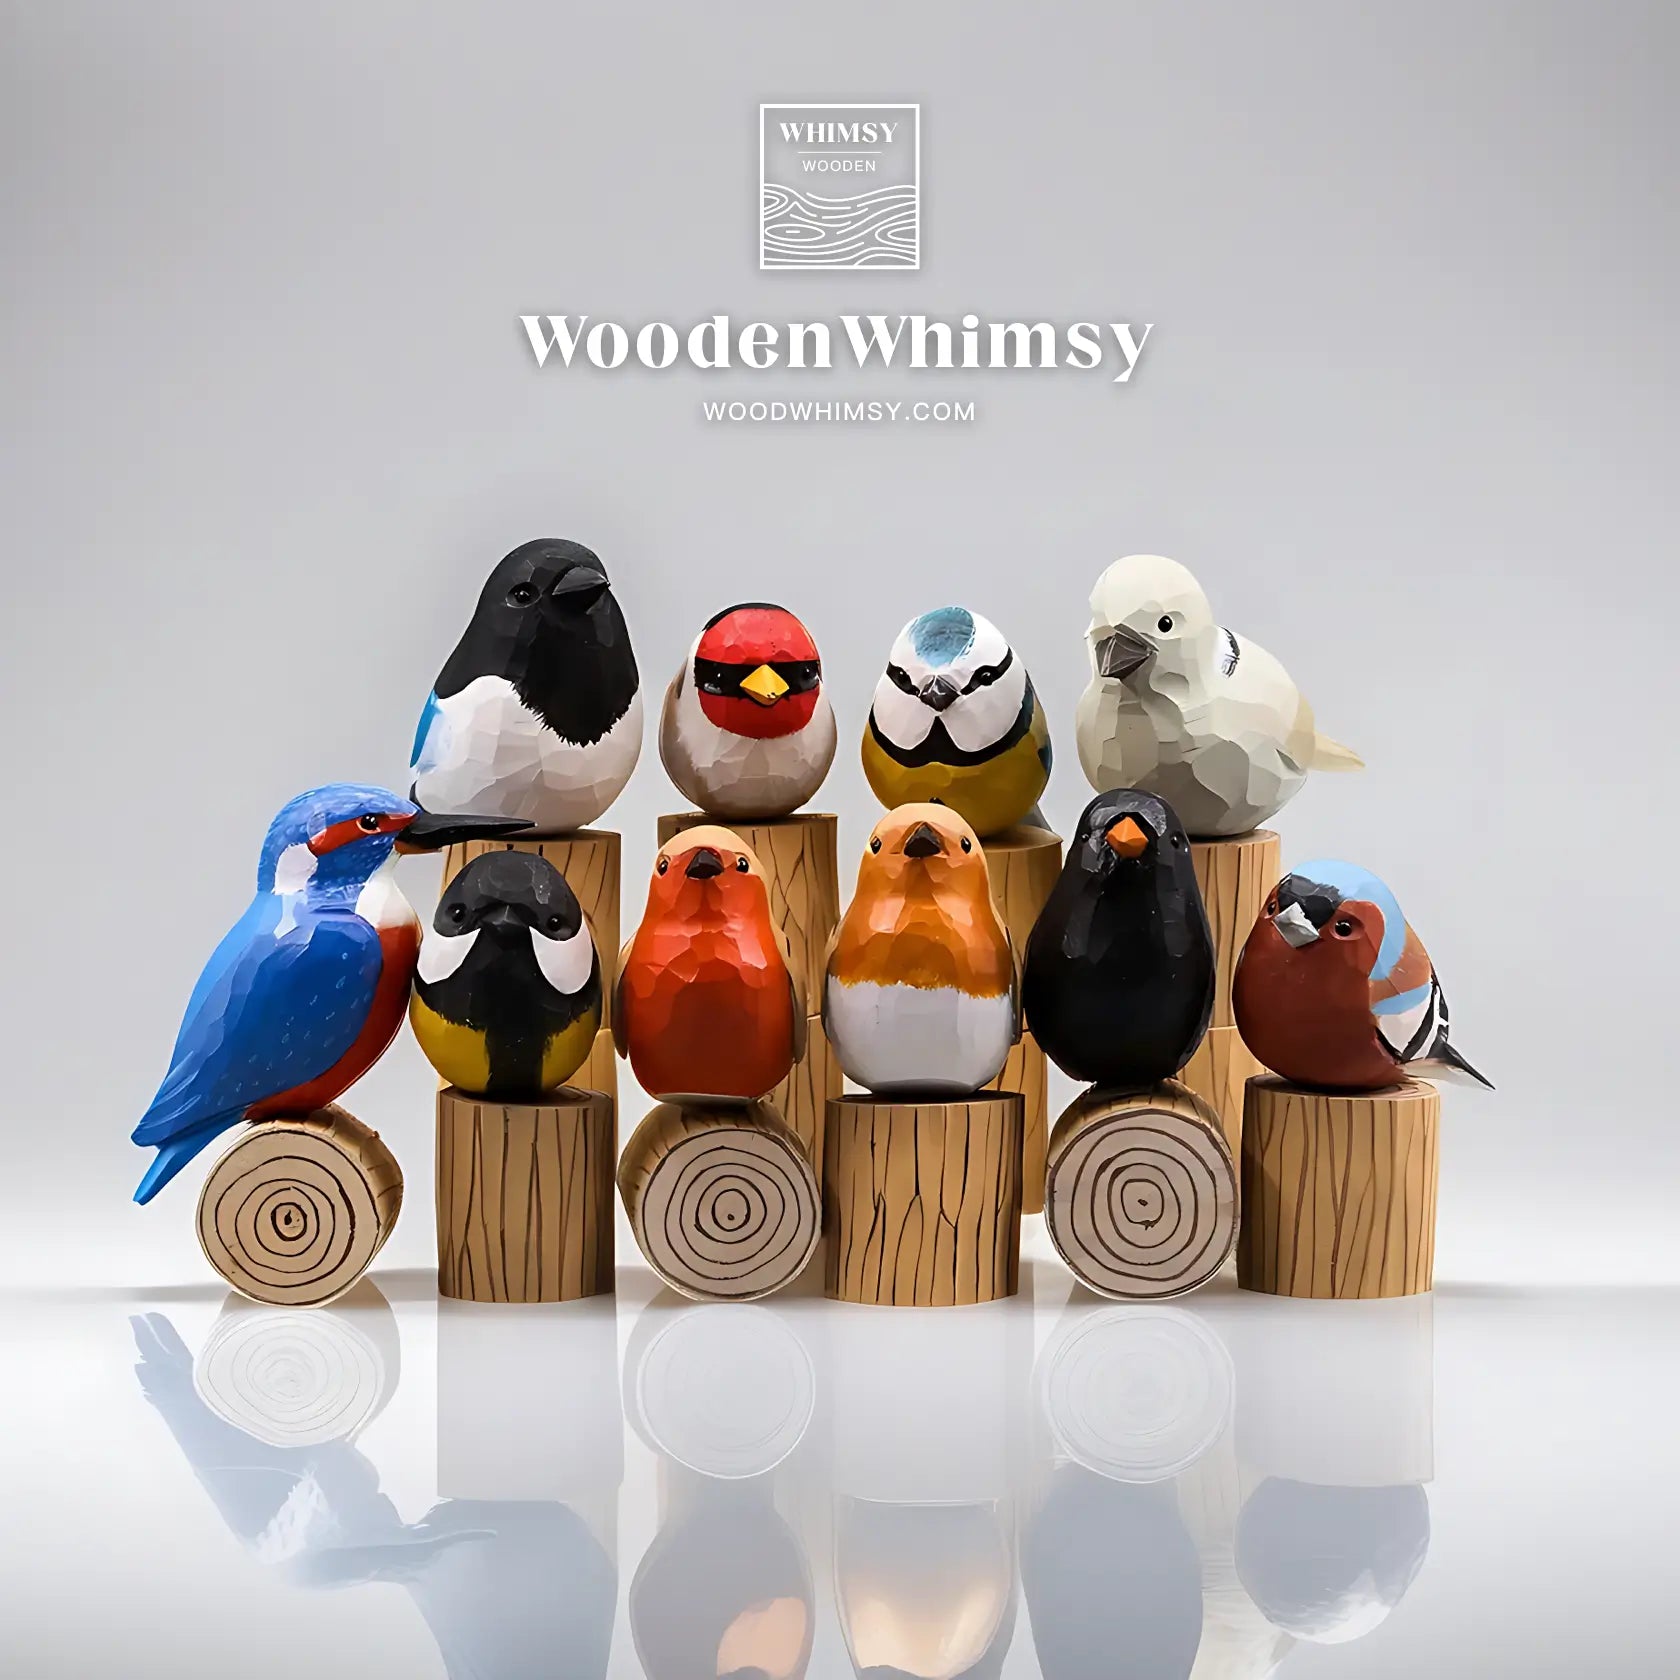 Promotional Display for Discounted Wooden Birds, Regularly Priced at $39, Now $26